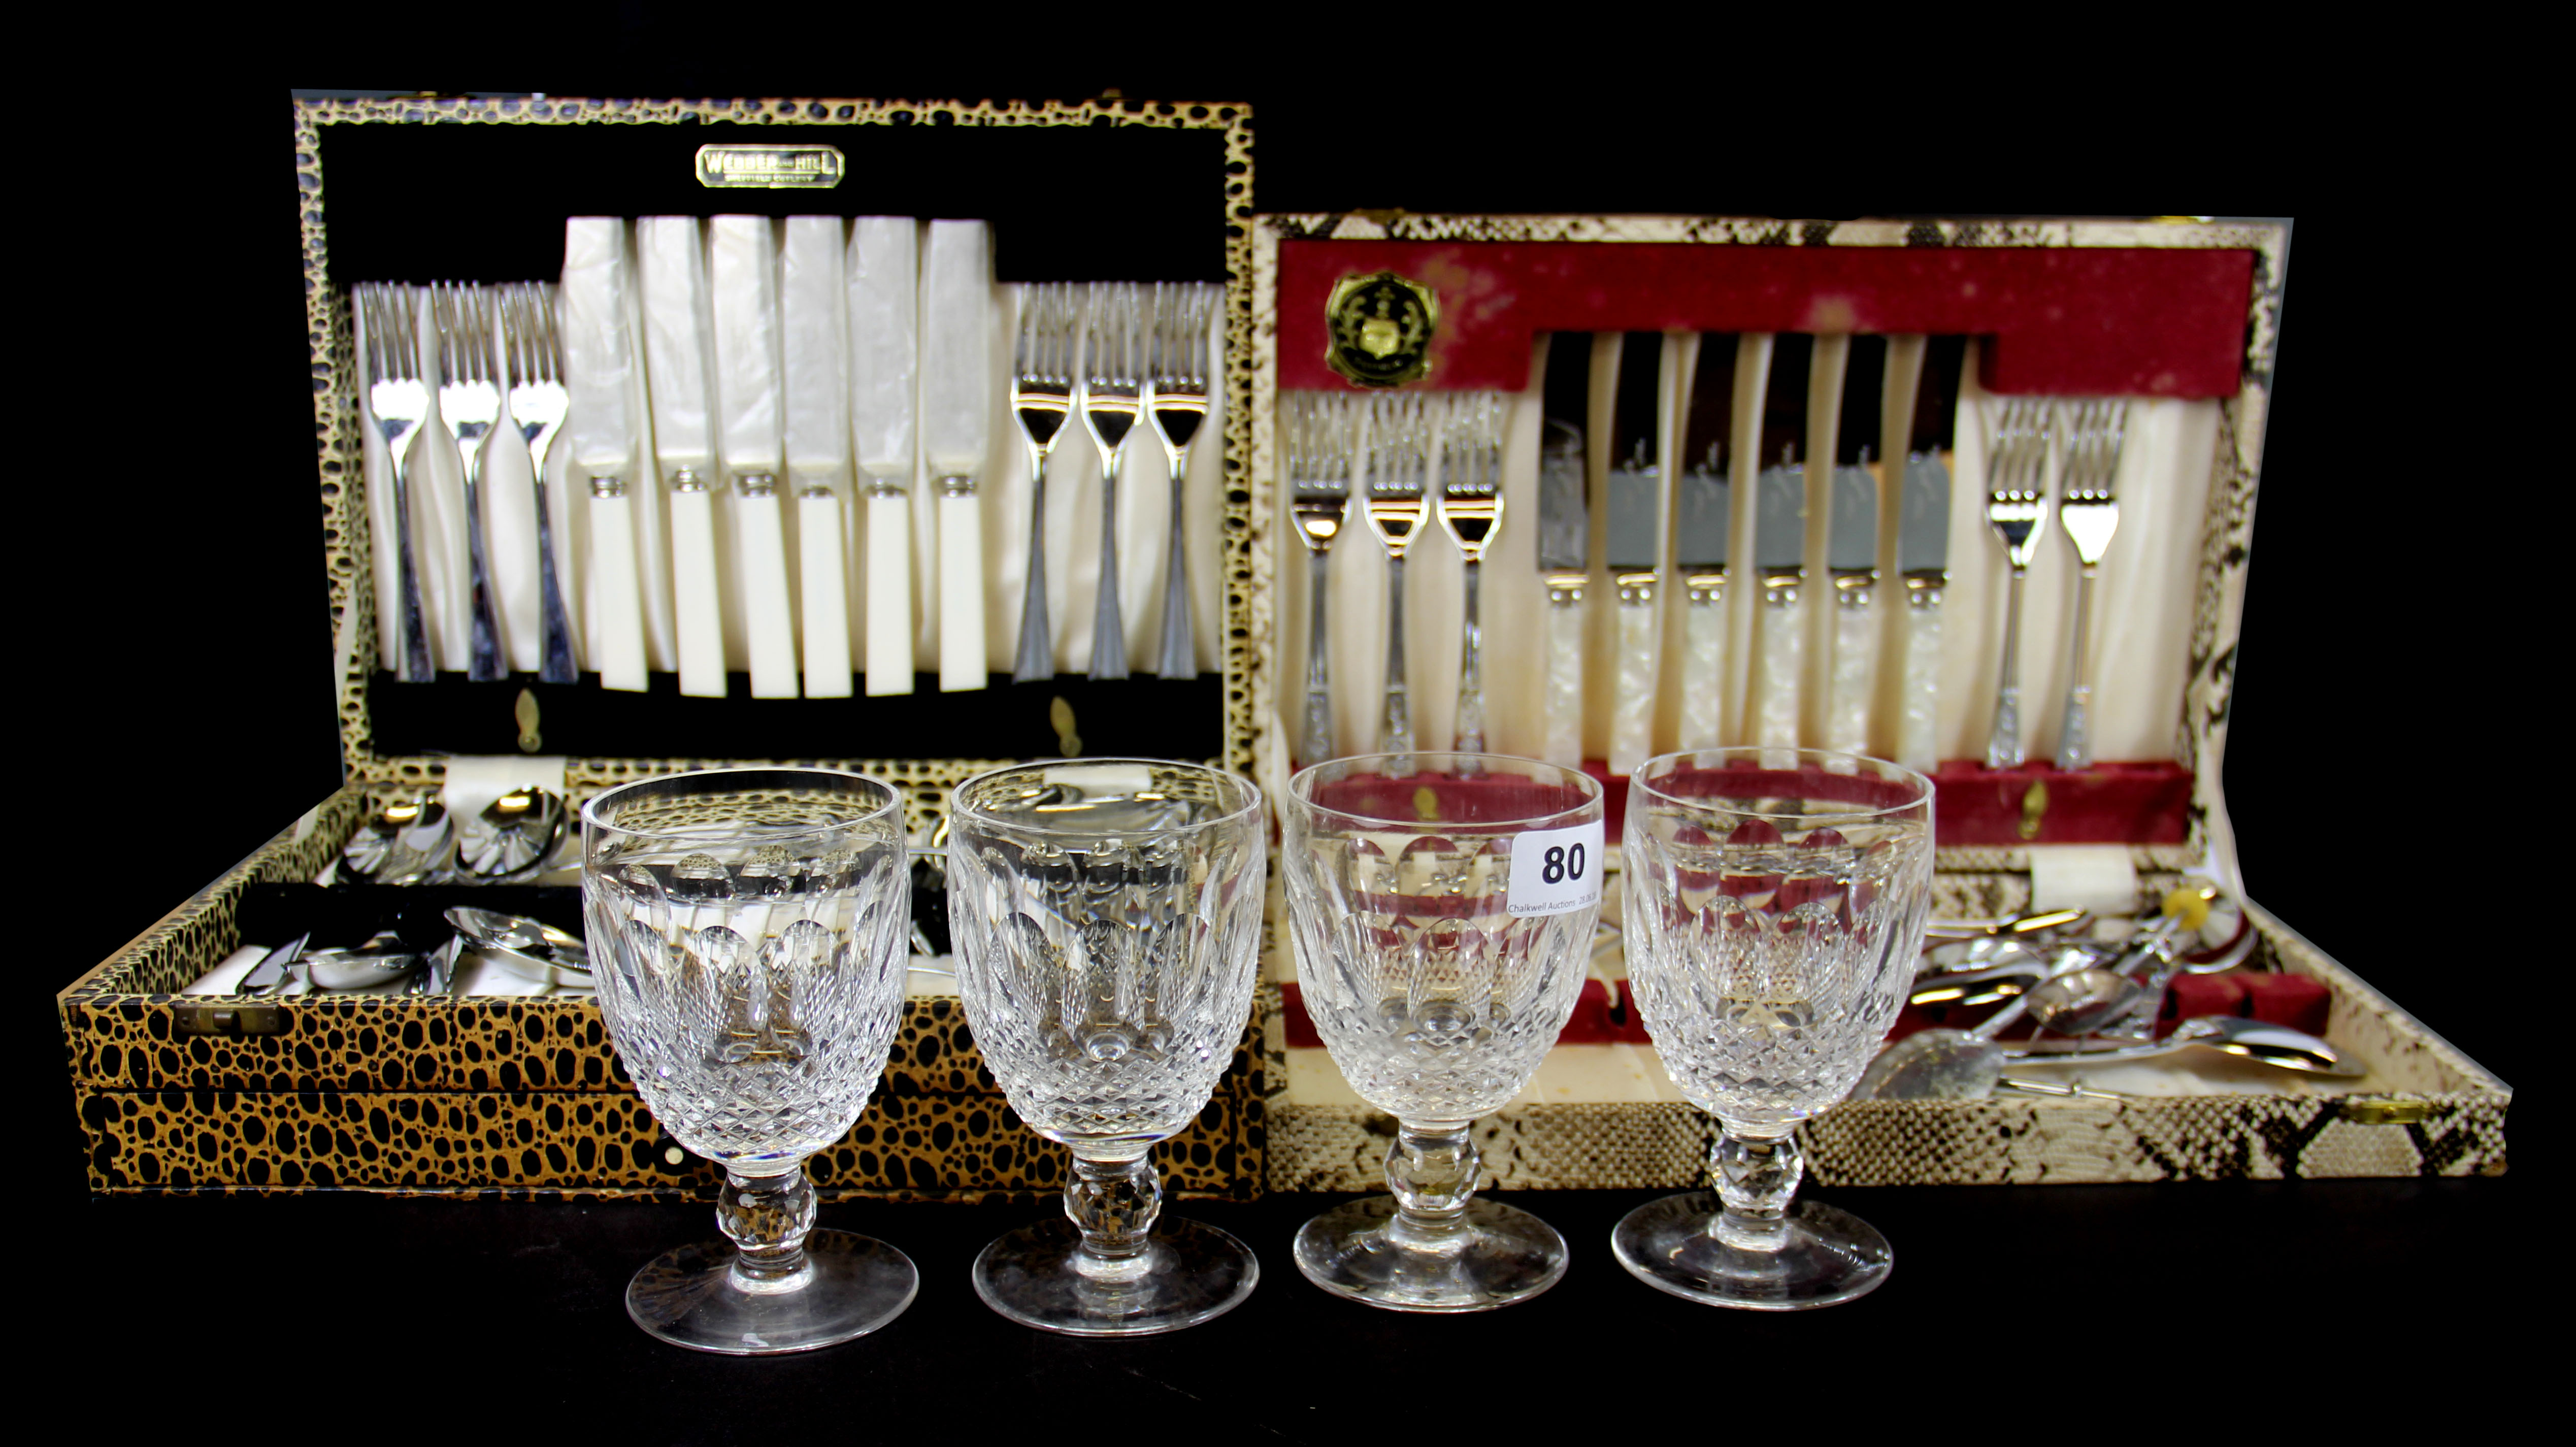 Two 1960's cases of cutlery and four cut glass Waterford wine goblets.